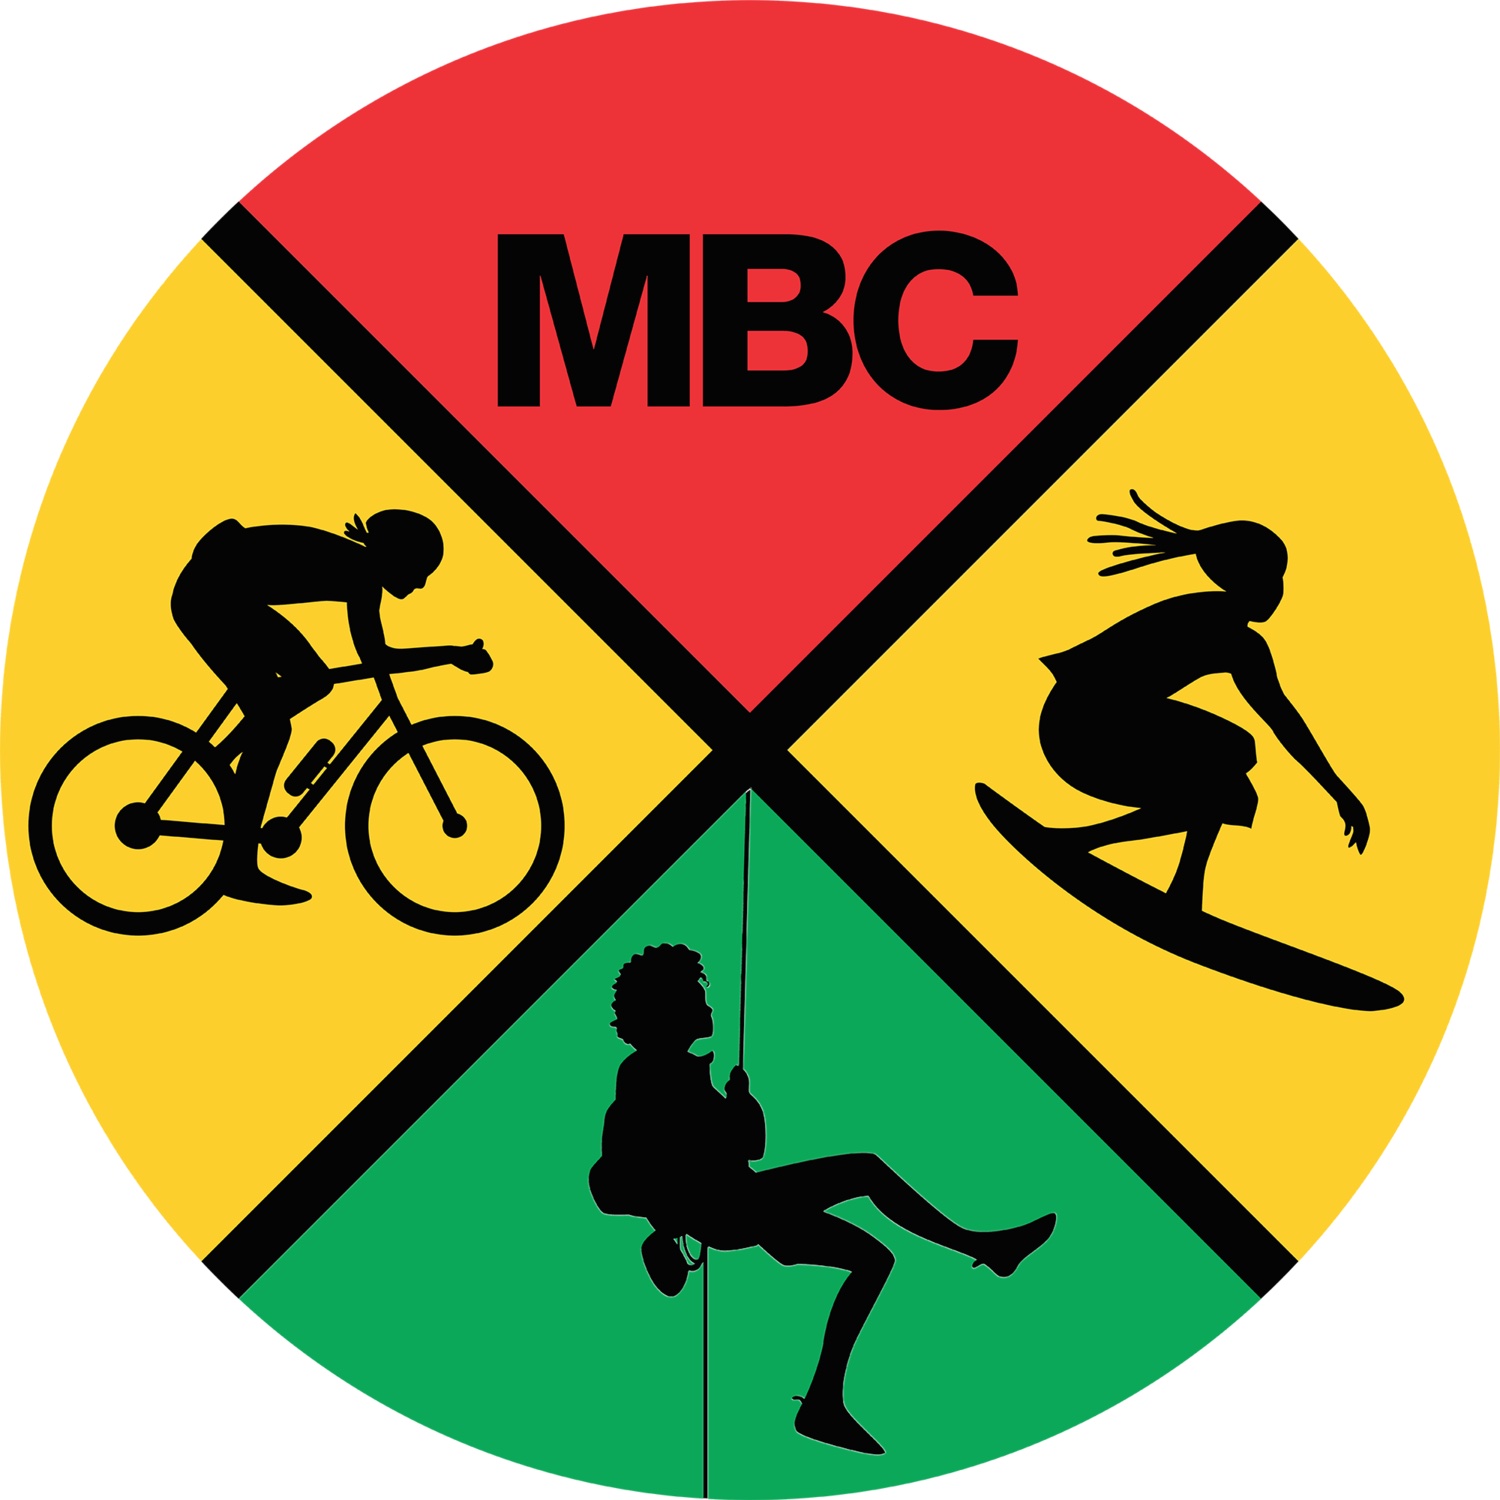 a graphic circle in yellow, red and green with images of a biker, climber and surfer with the letters MBC